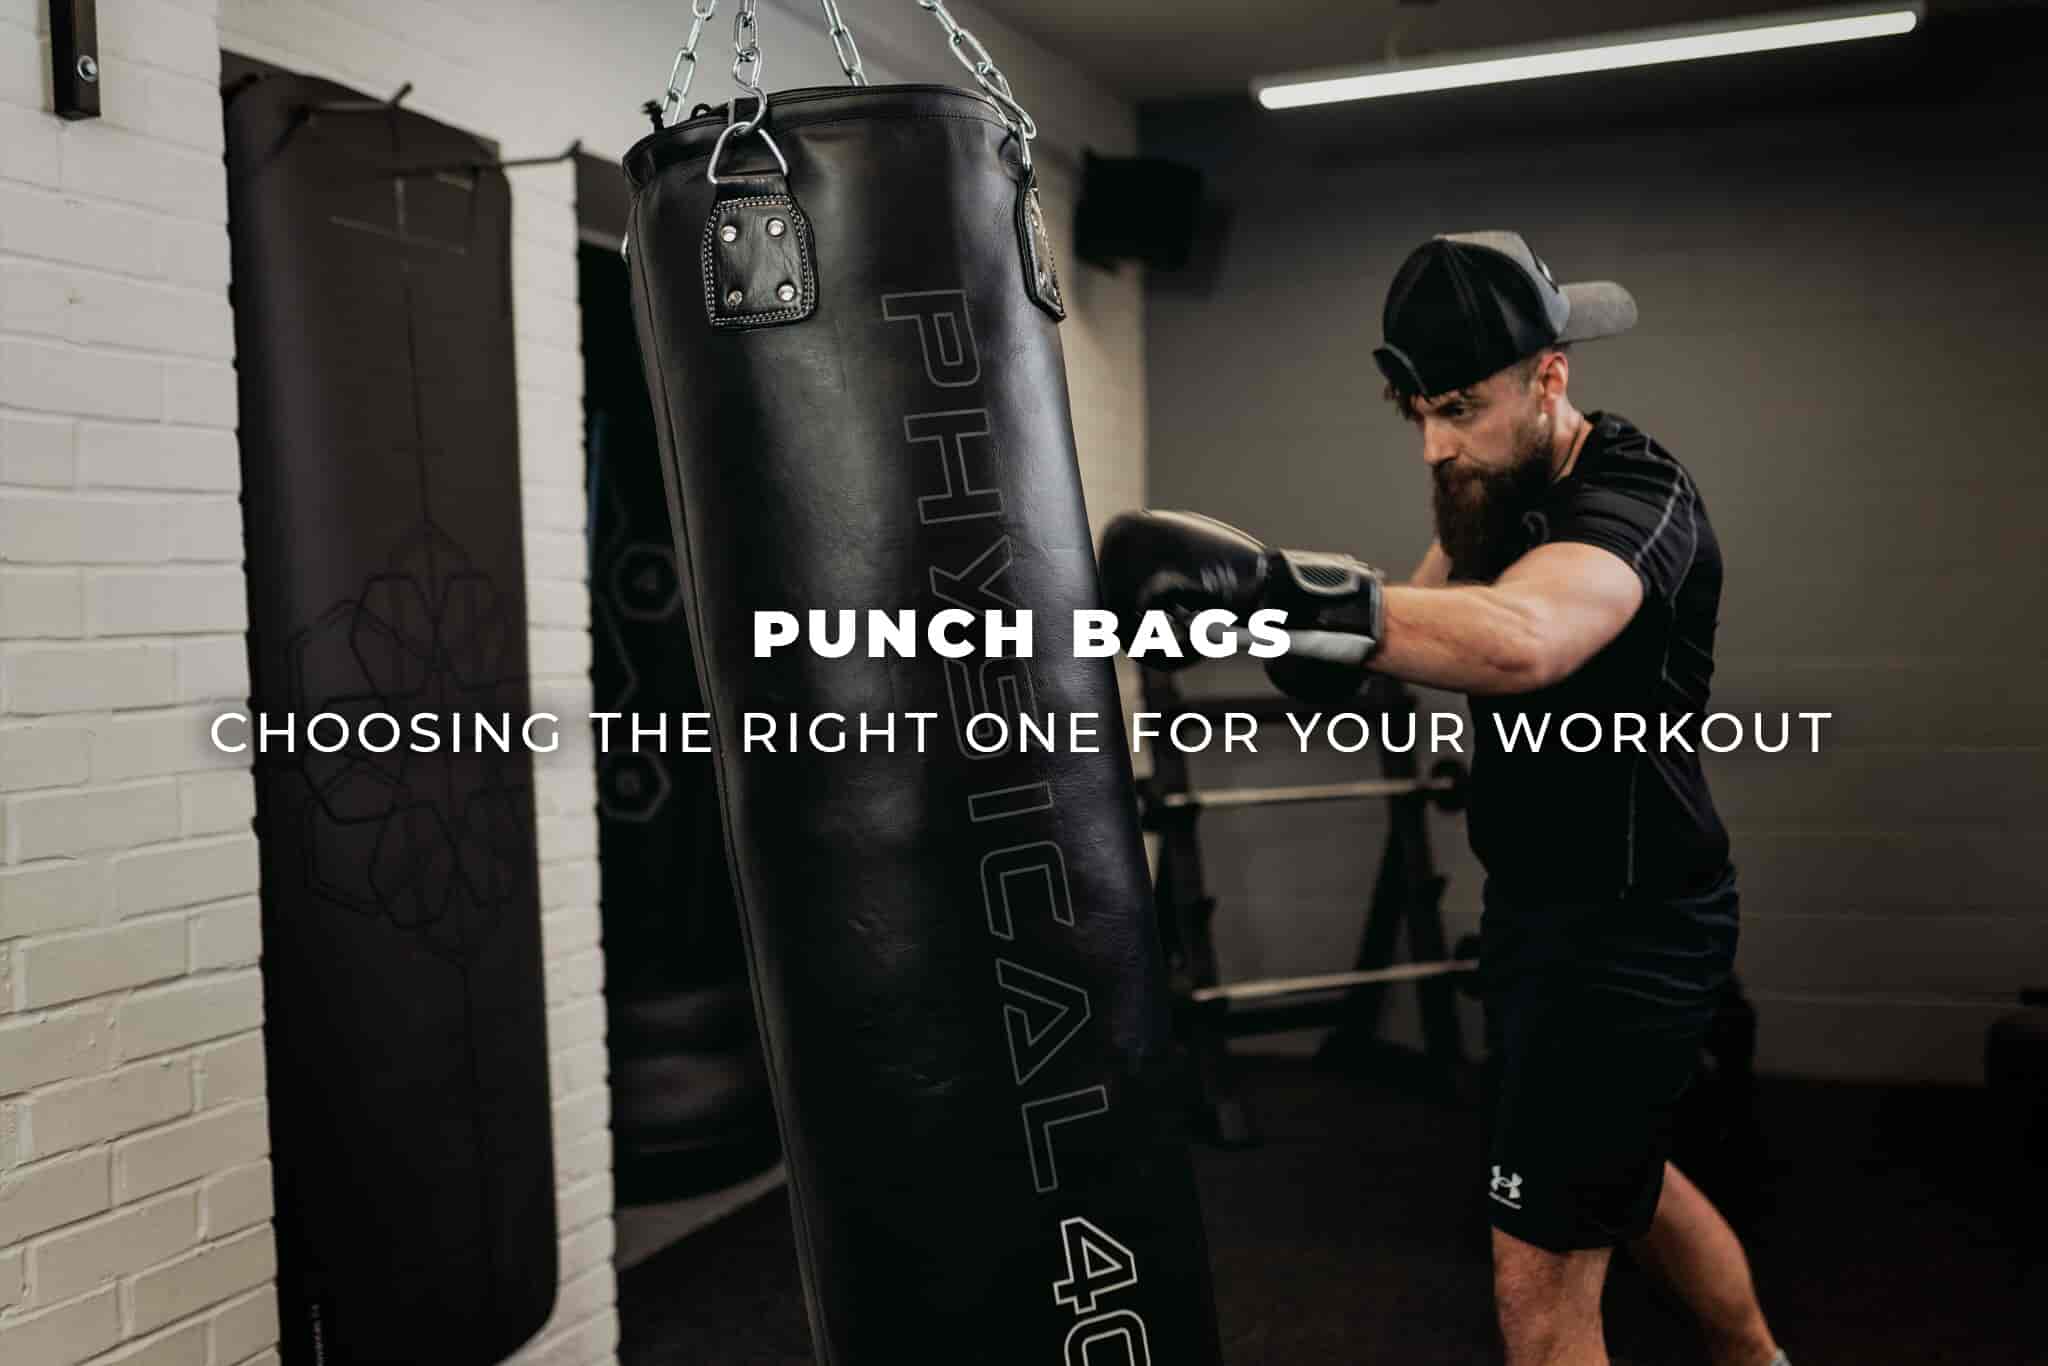 Punch Bags - Choose the right one for your workout